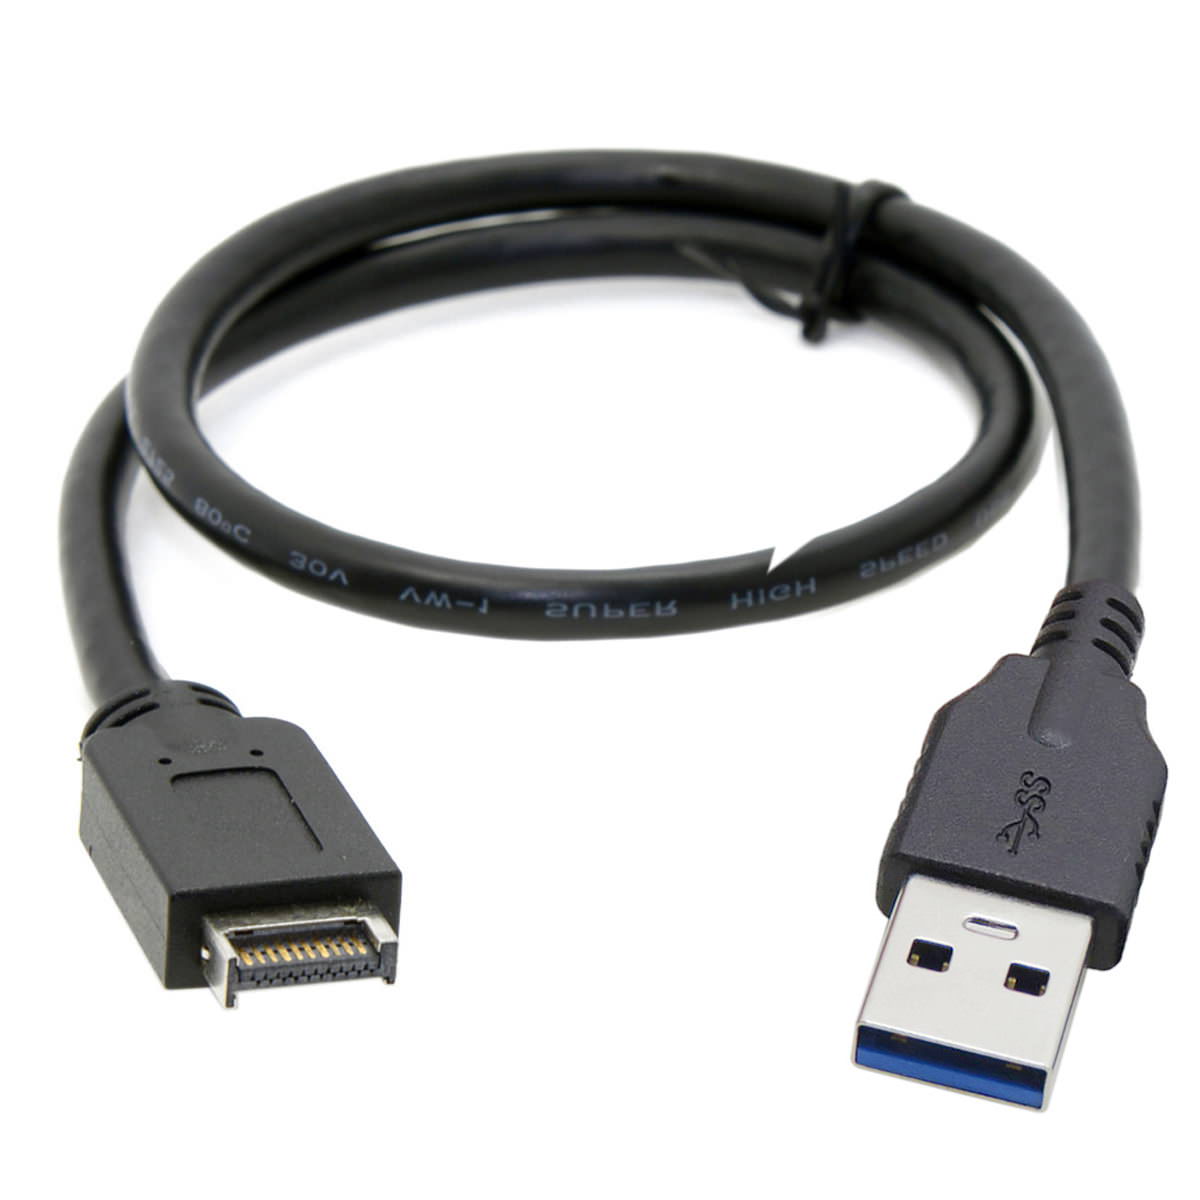 USB32-AE-50 | USB 3.2 Type-E to Type-A Adapter Cable